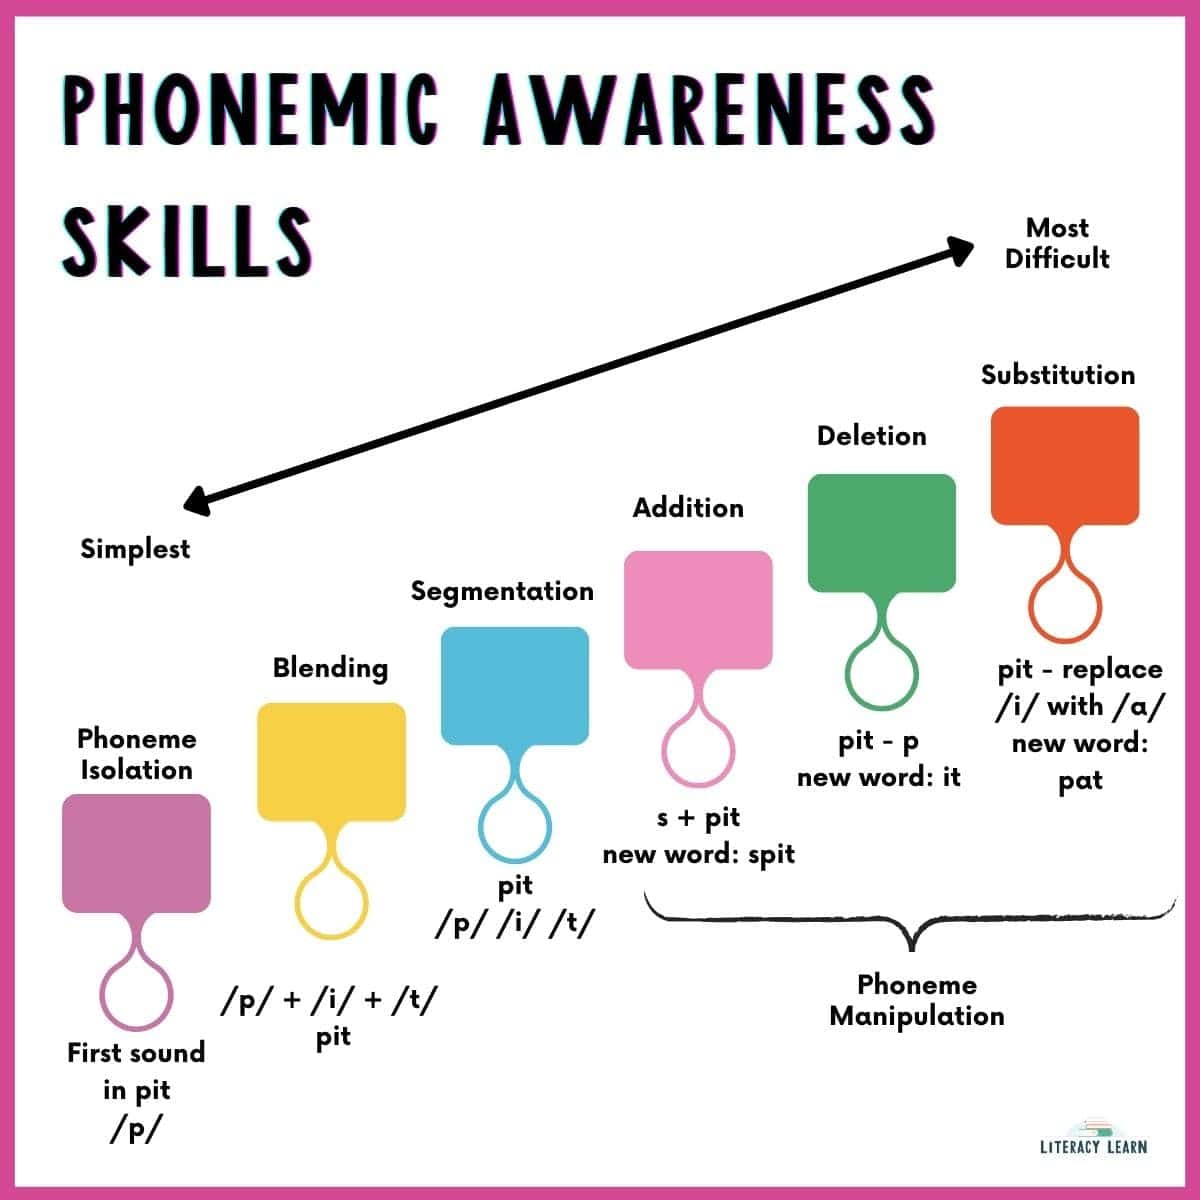 Graphic entitled "Phonemic Awareness Skills" showing the progression of skills from simplest to most complex.